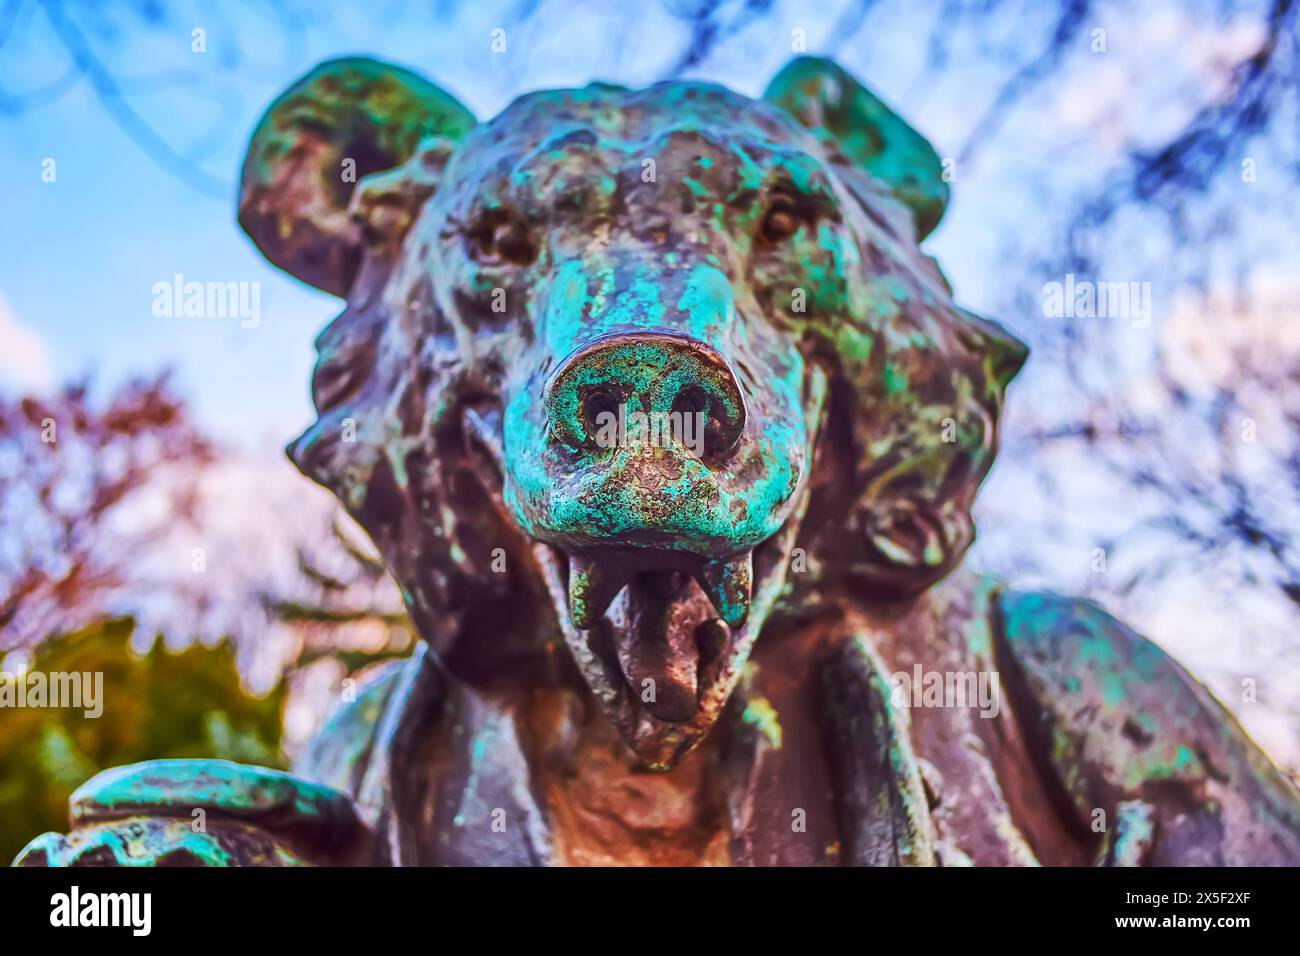 BUDAPEST, HUNGARY - MARCH 3, 2022: The bronze sculpture by Gyula Maugsch with Zsigmond Sebok's fairy tale character - the Bear, Budapest, Hungary Stock Photo